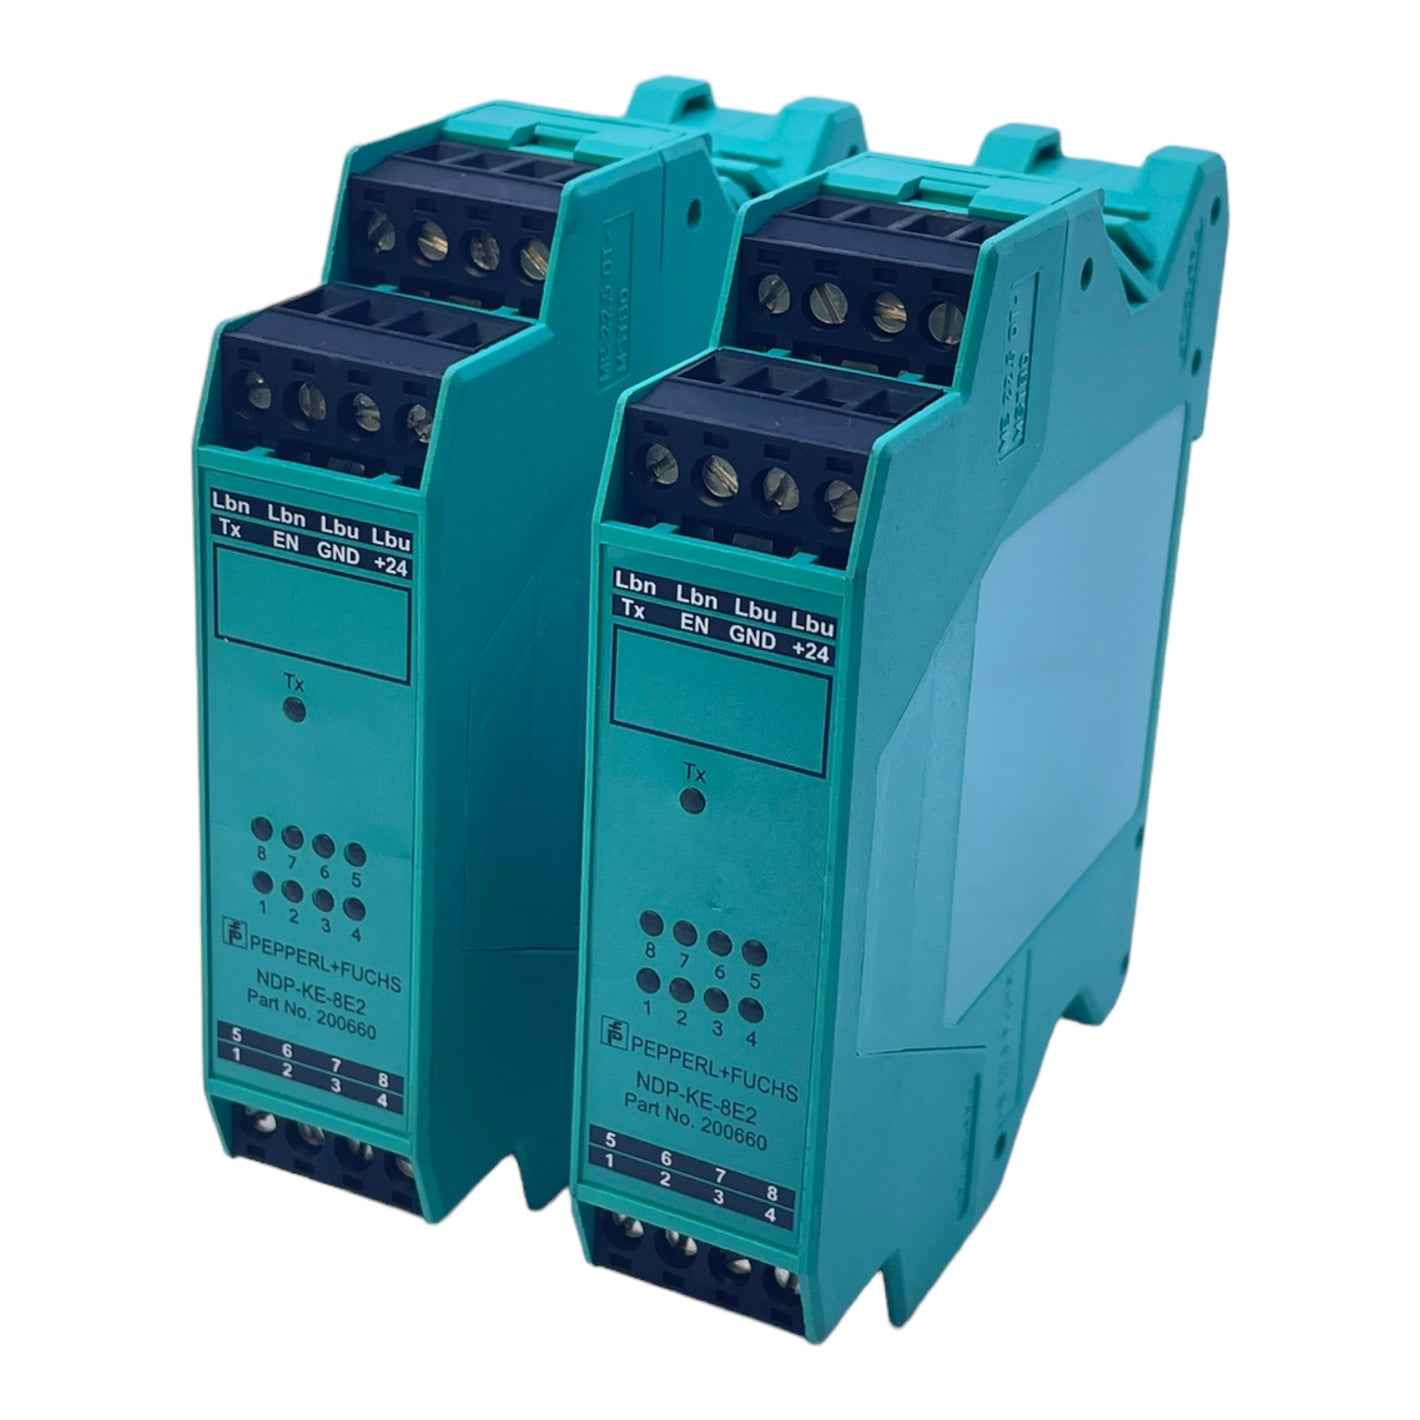 Pepperl+Fuchs NDP-KE-8E2 WIS module primary 200660 inductive IP20 24V DC Pack of: 2 pieces. 